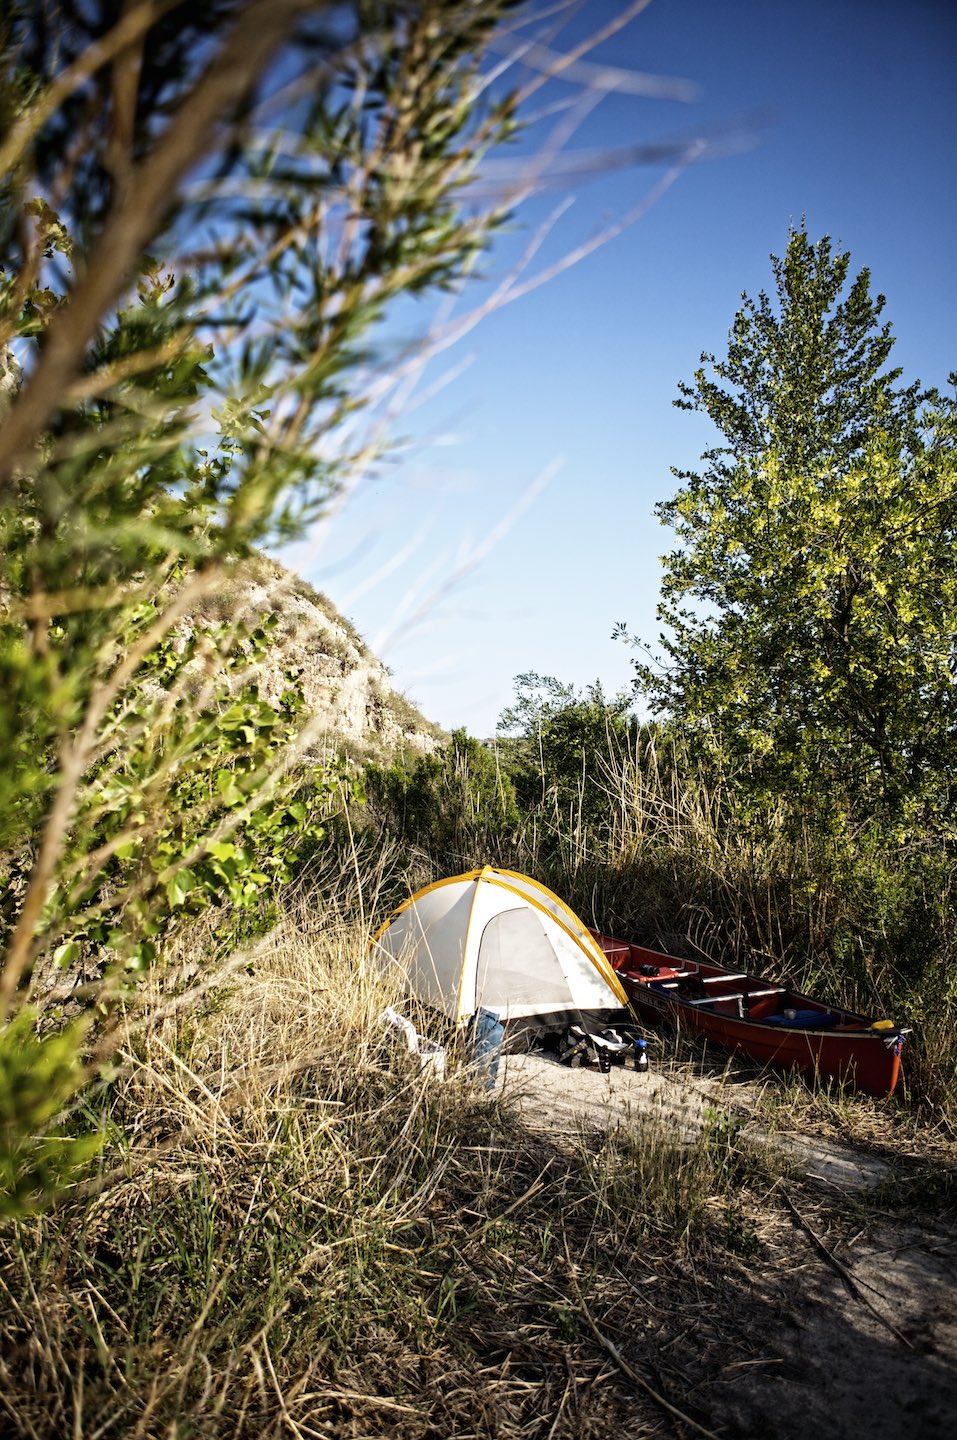 A lone tent and a canoe surrounded by greenery in the wilderness. 